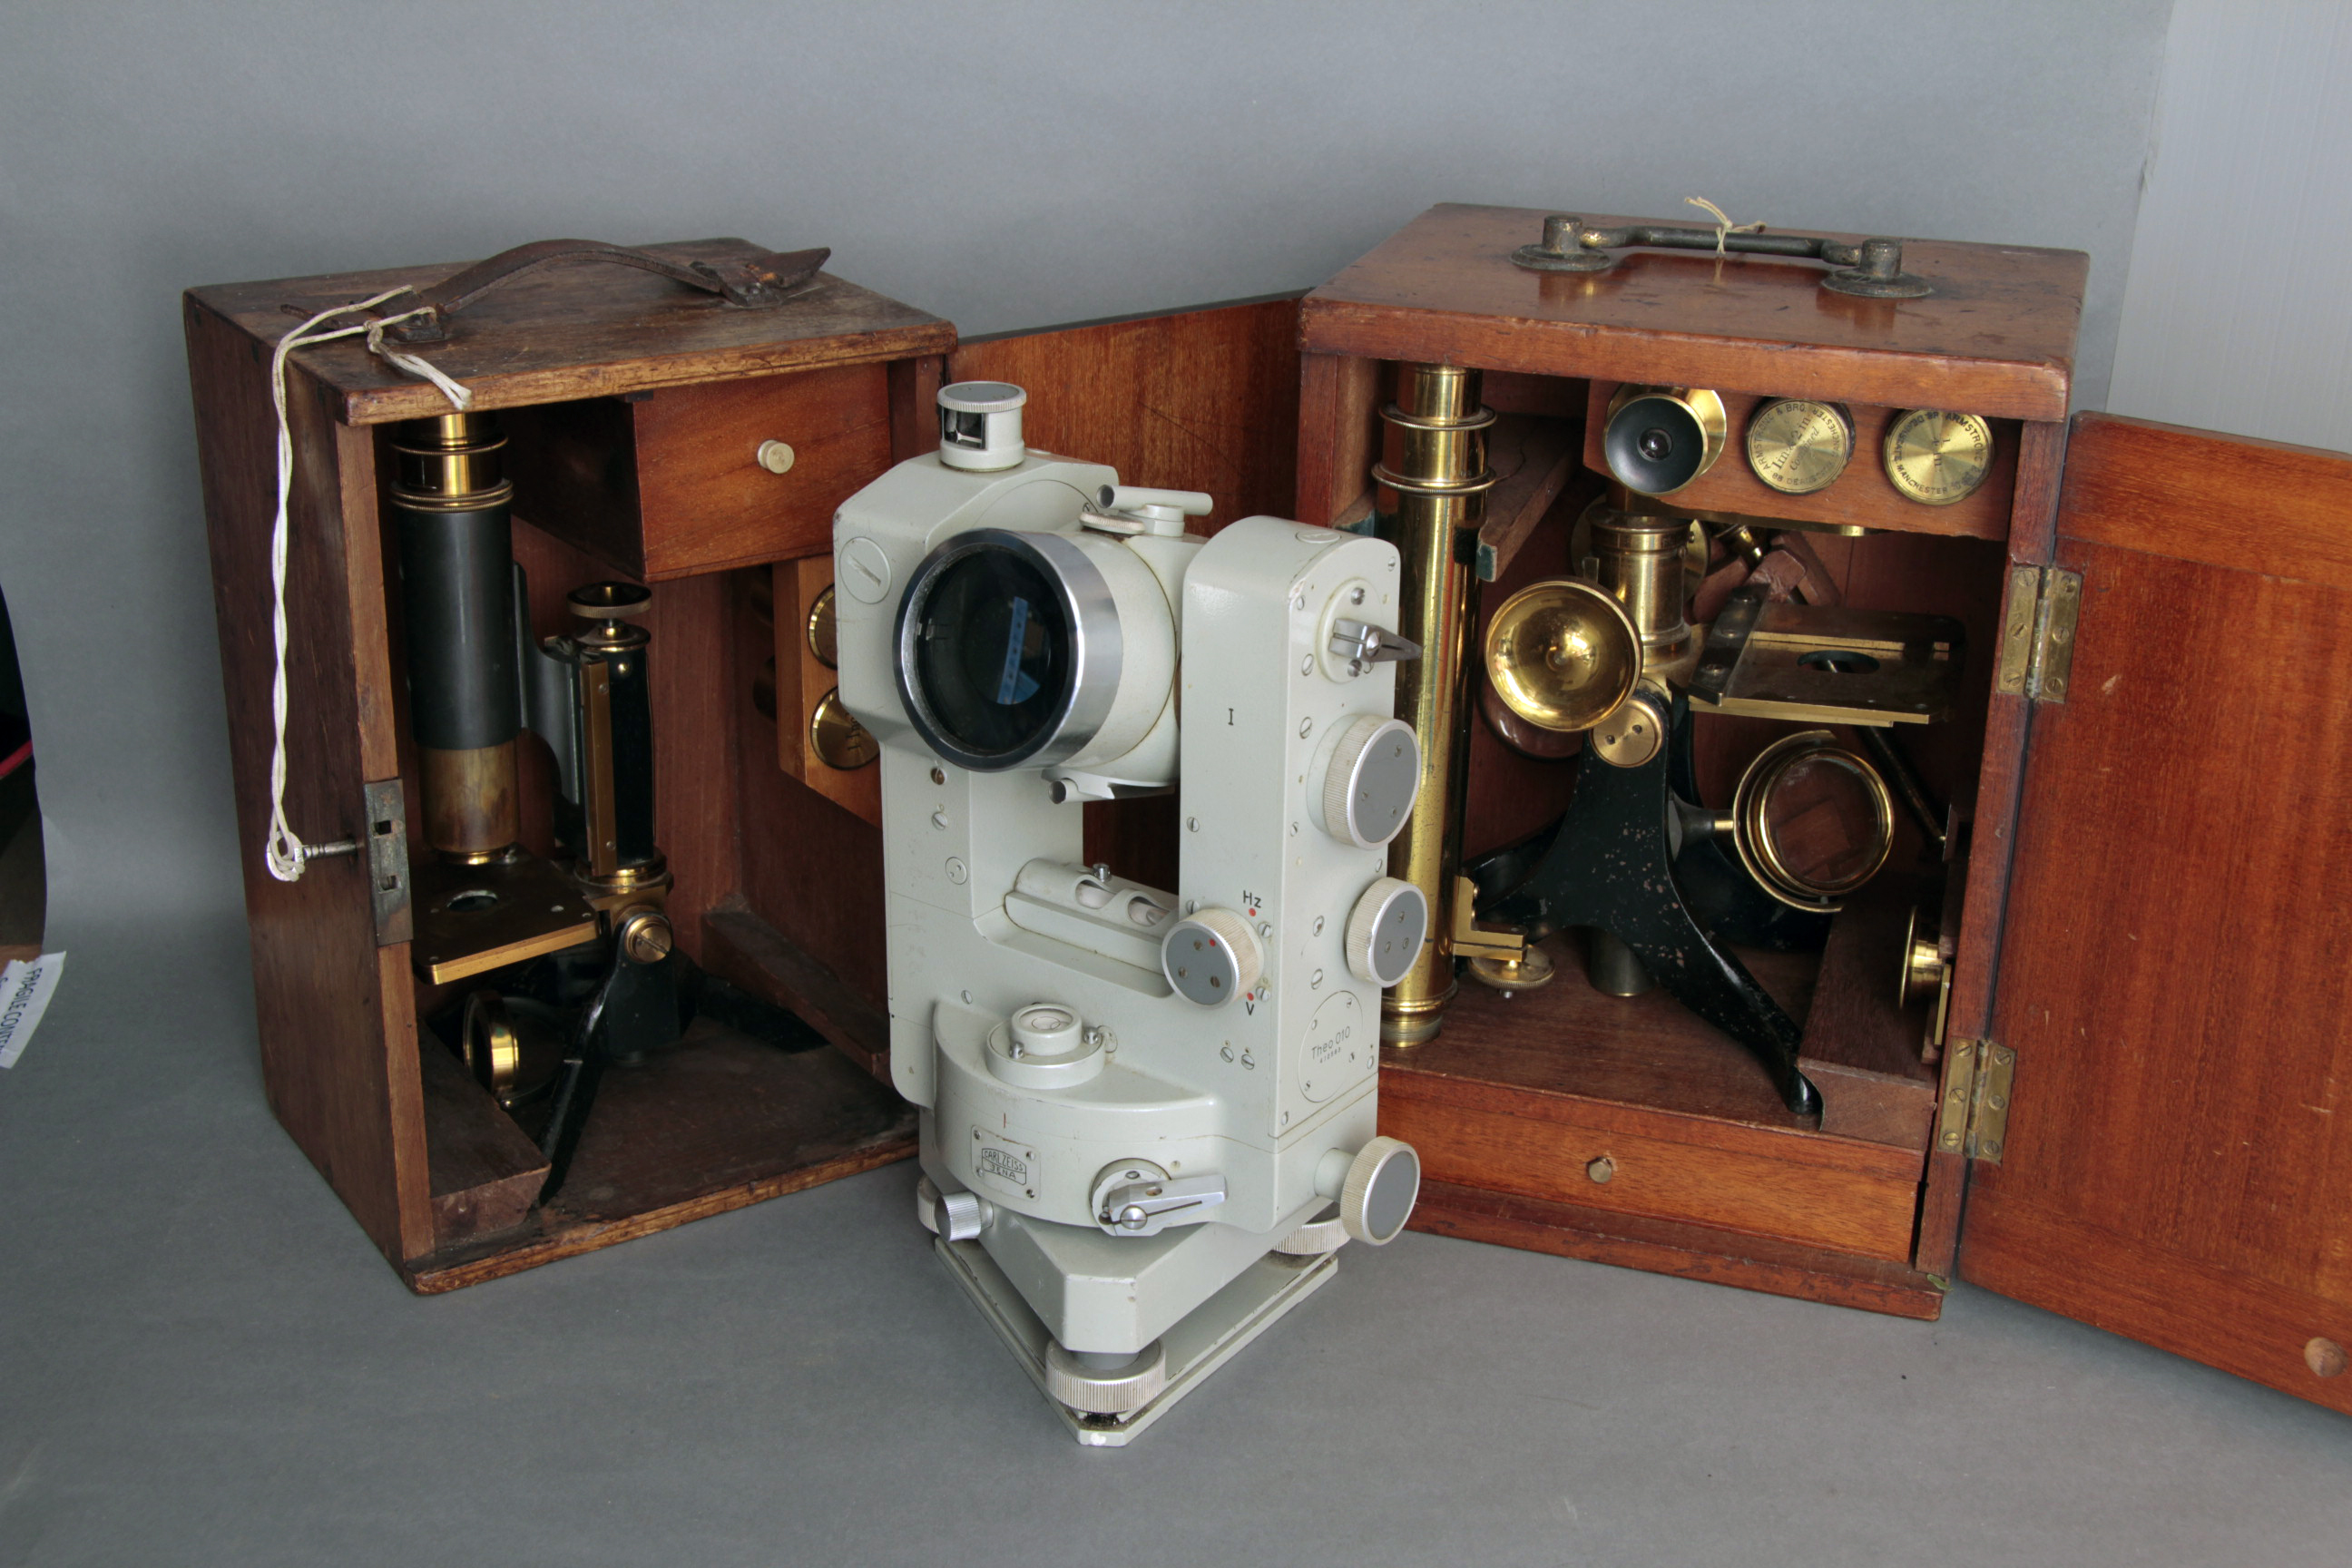 Theodolite, made by Carl Zeiss Jena together with two microscopes all in wooden boxes (3)